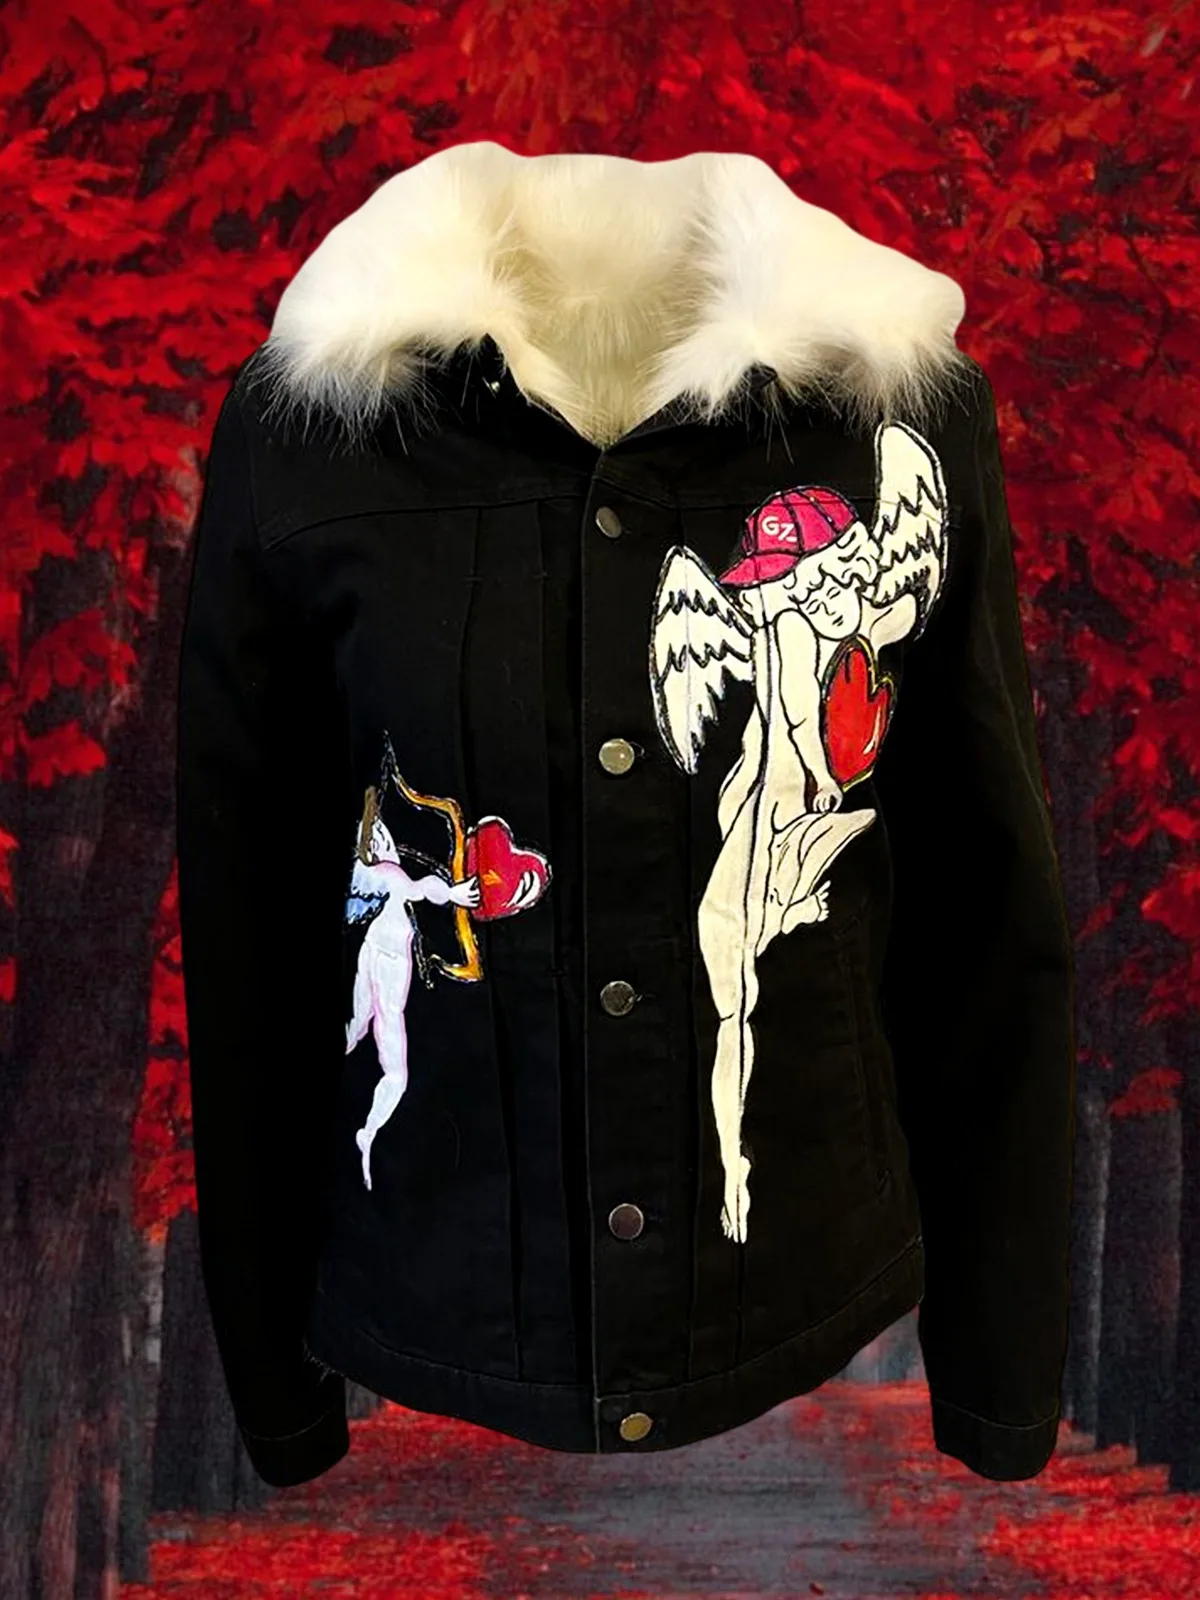 2022 Fashion GZ Design Angel Hand-painted Black Women Jean Jacket With Faux Fur Inside s45 non high frequency pilot arc back striking plasma cutting hand inside head pf0125